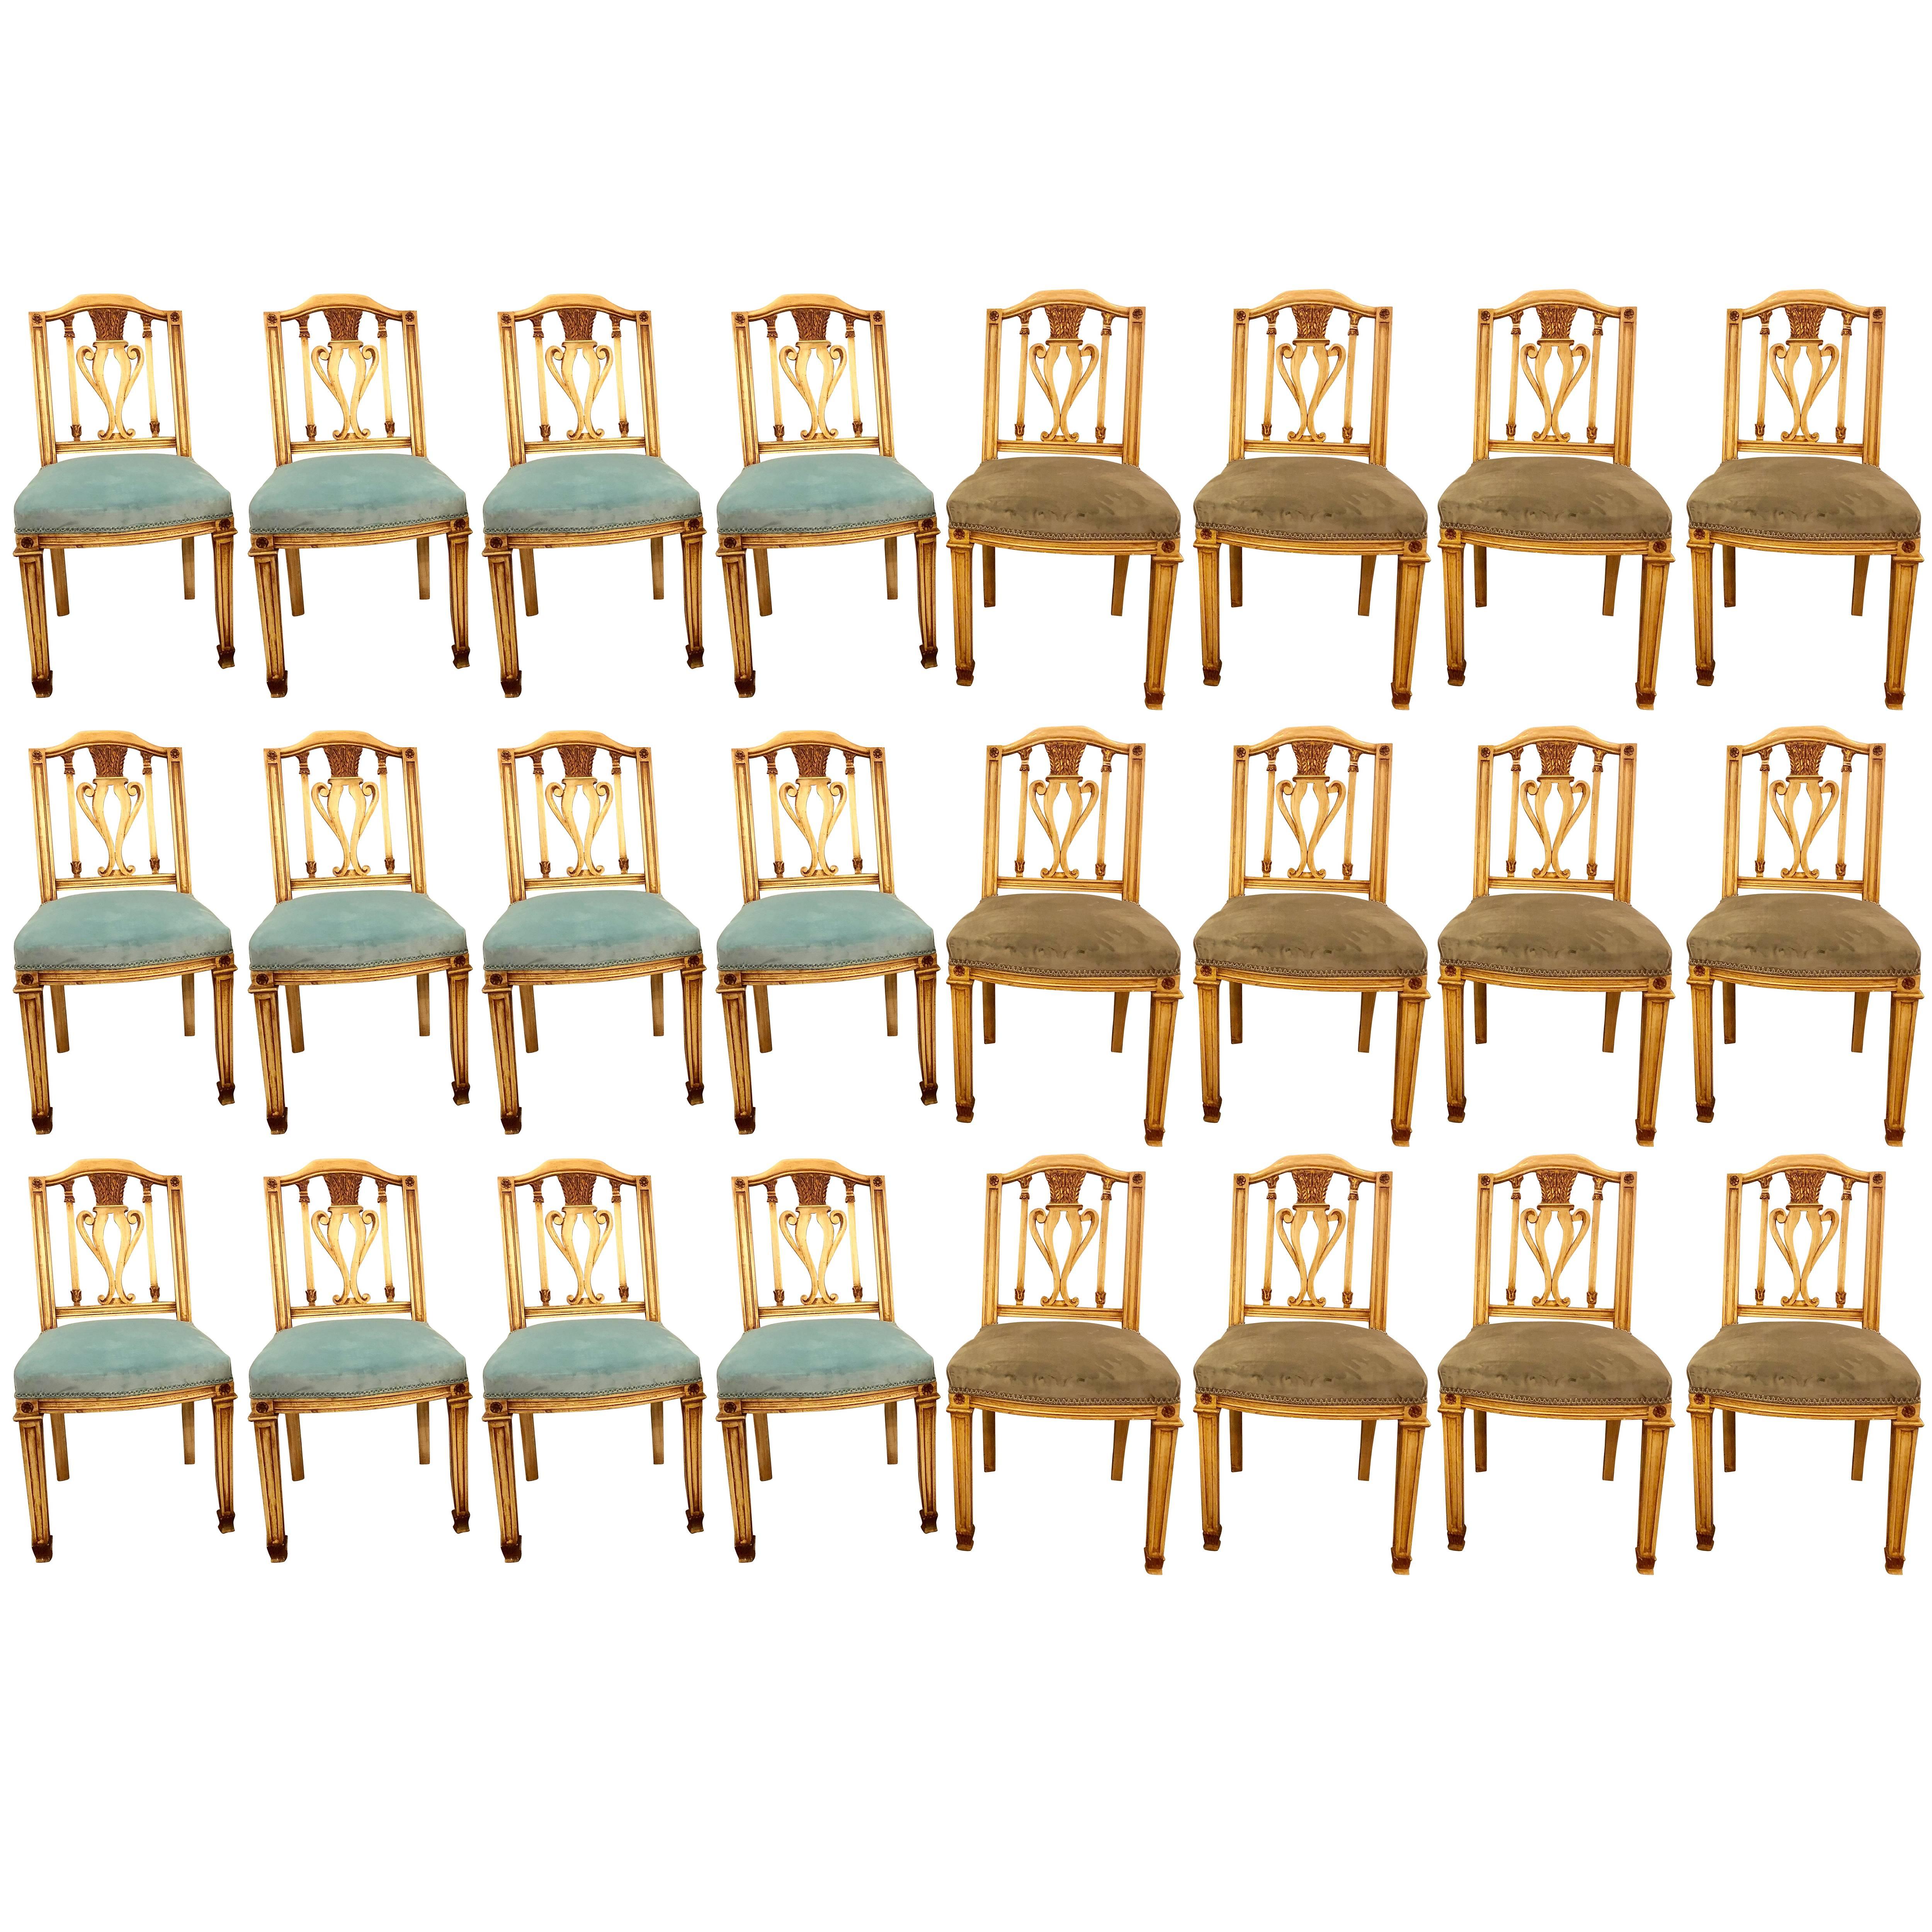 Set of 12 Painted Dining Chairs in Manner of Maison Jansen